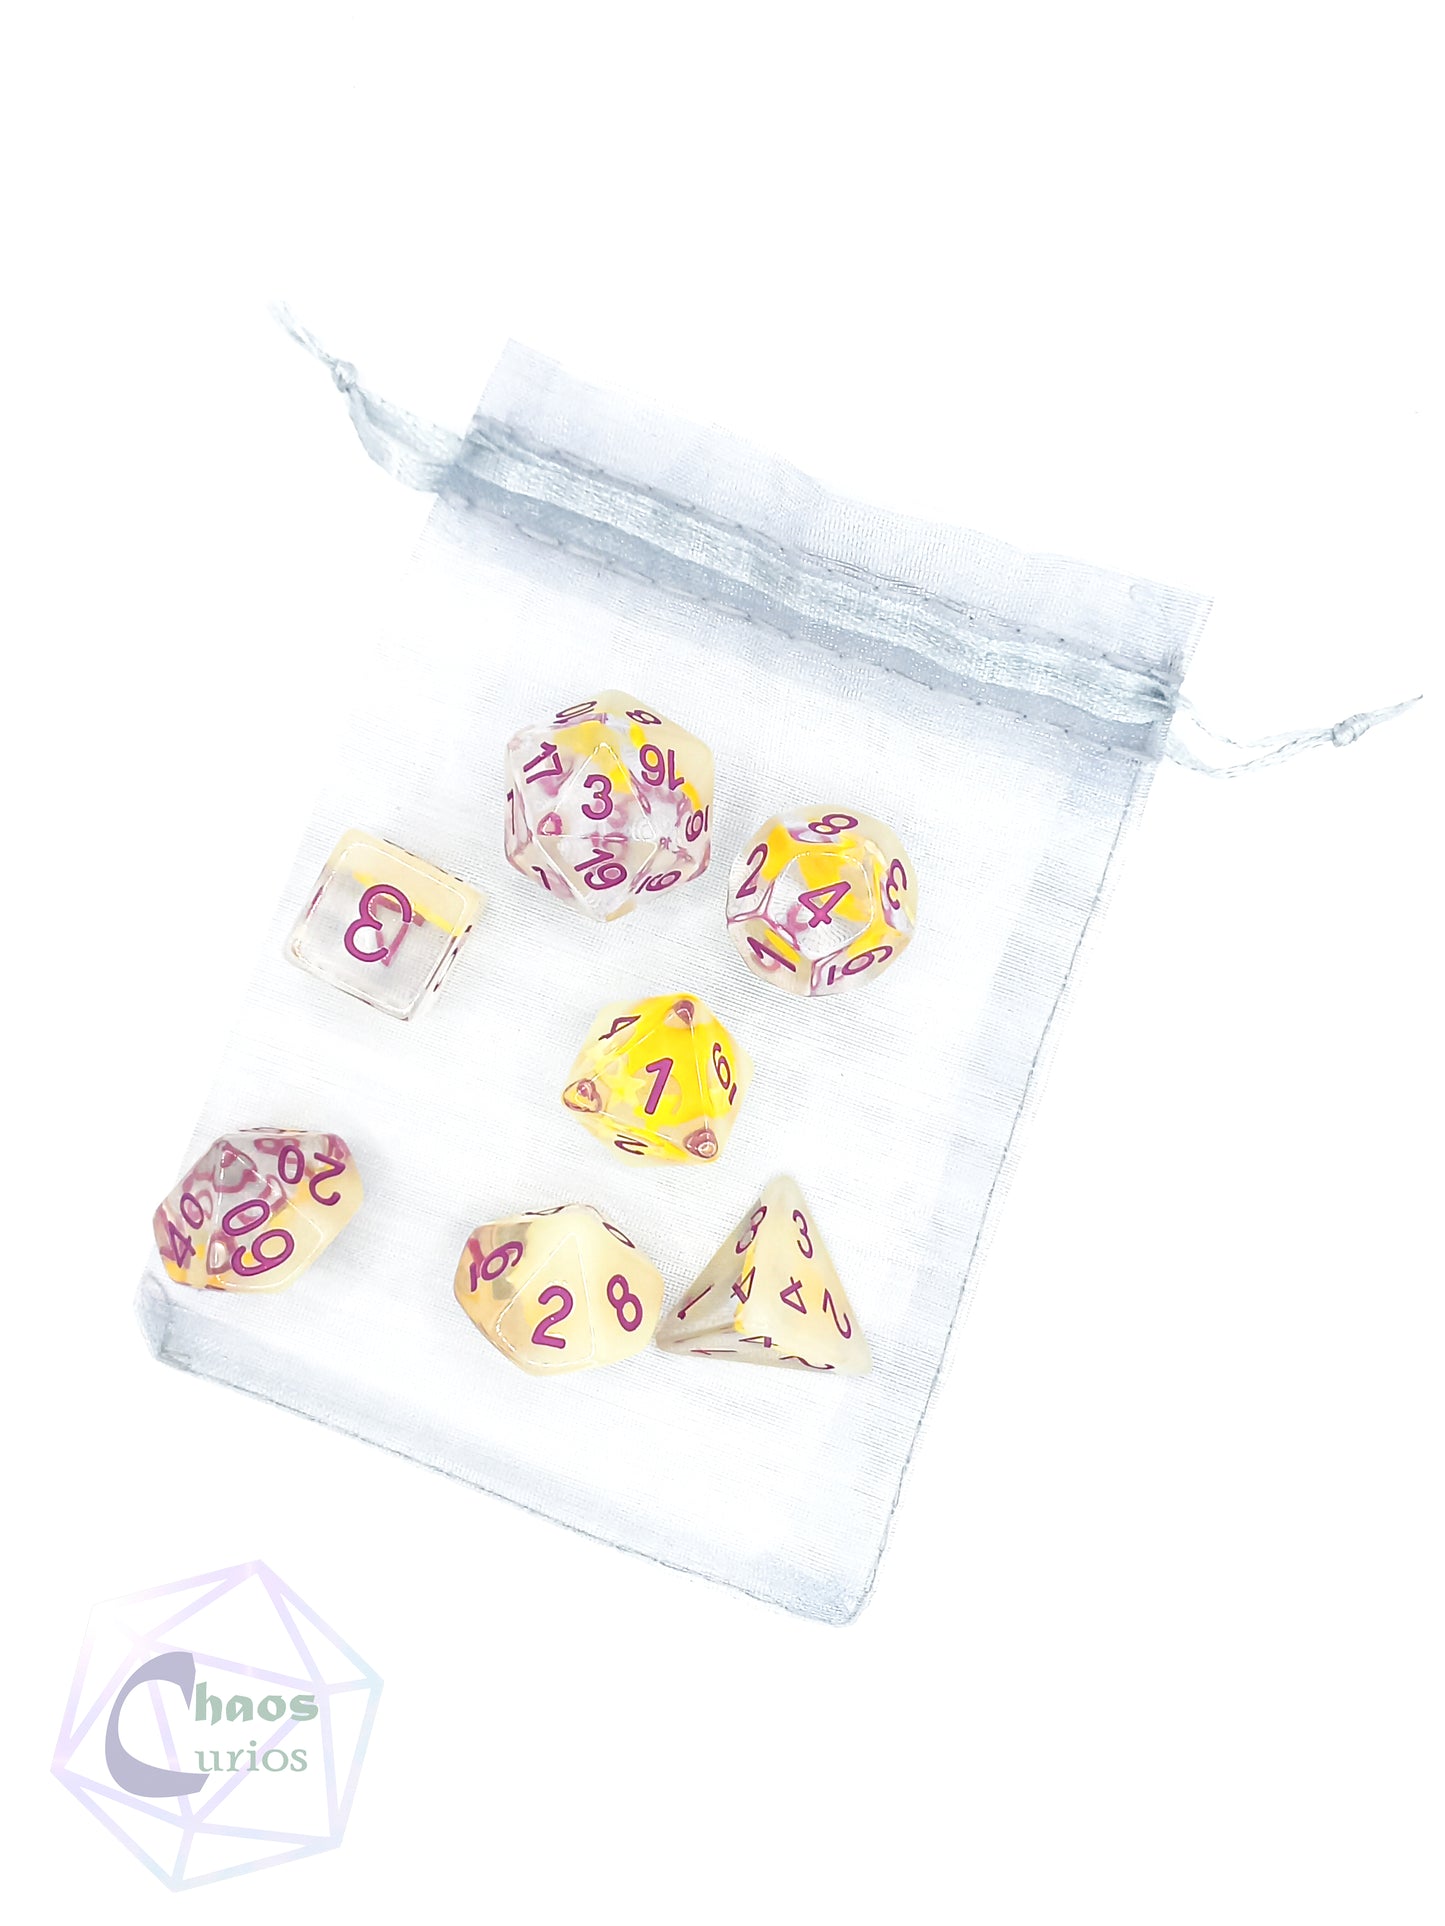 Moon and Stars 7-piece Resin Dice Set Glow in the Dark